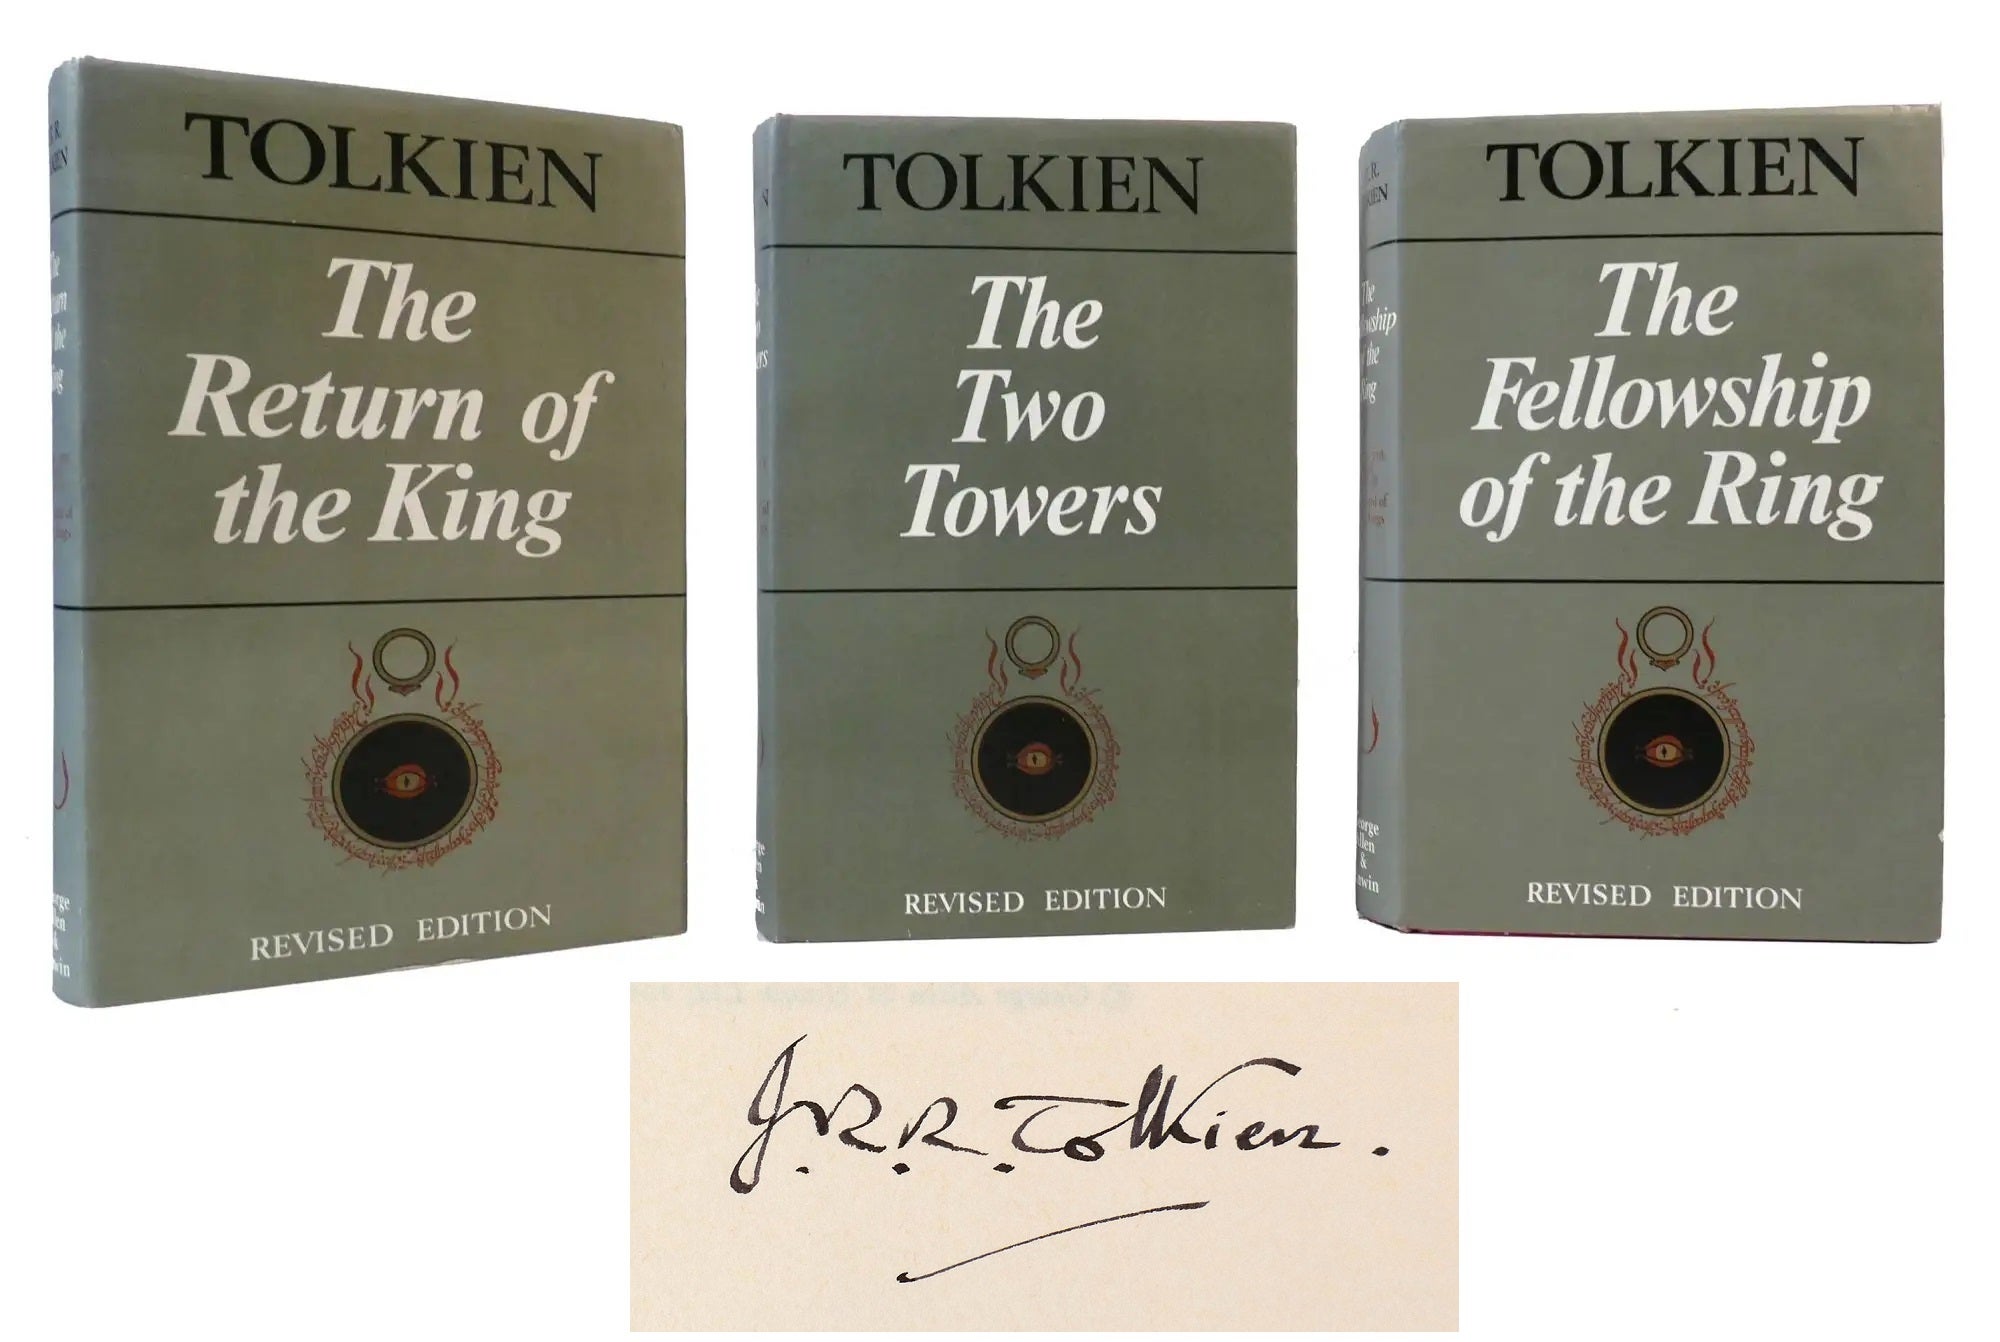 The Lord of the Rings by J. R. R. Tolkien · OverDrive: ebooks, audiobooks,  and more for libraries and schools